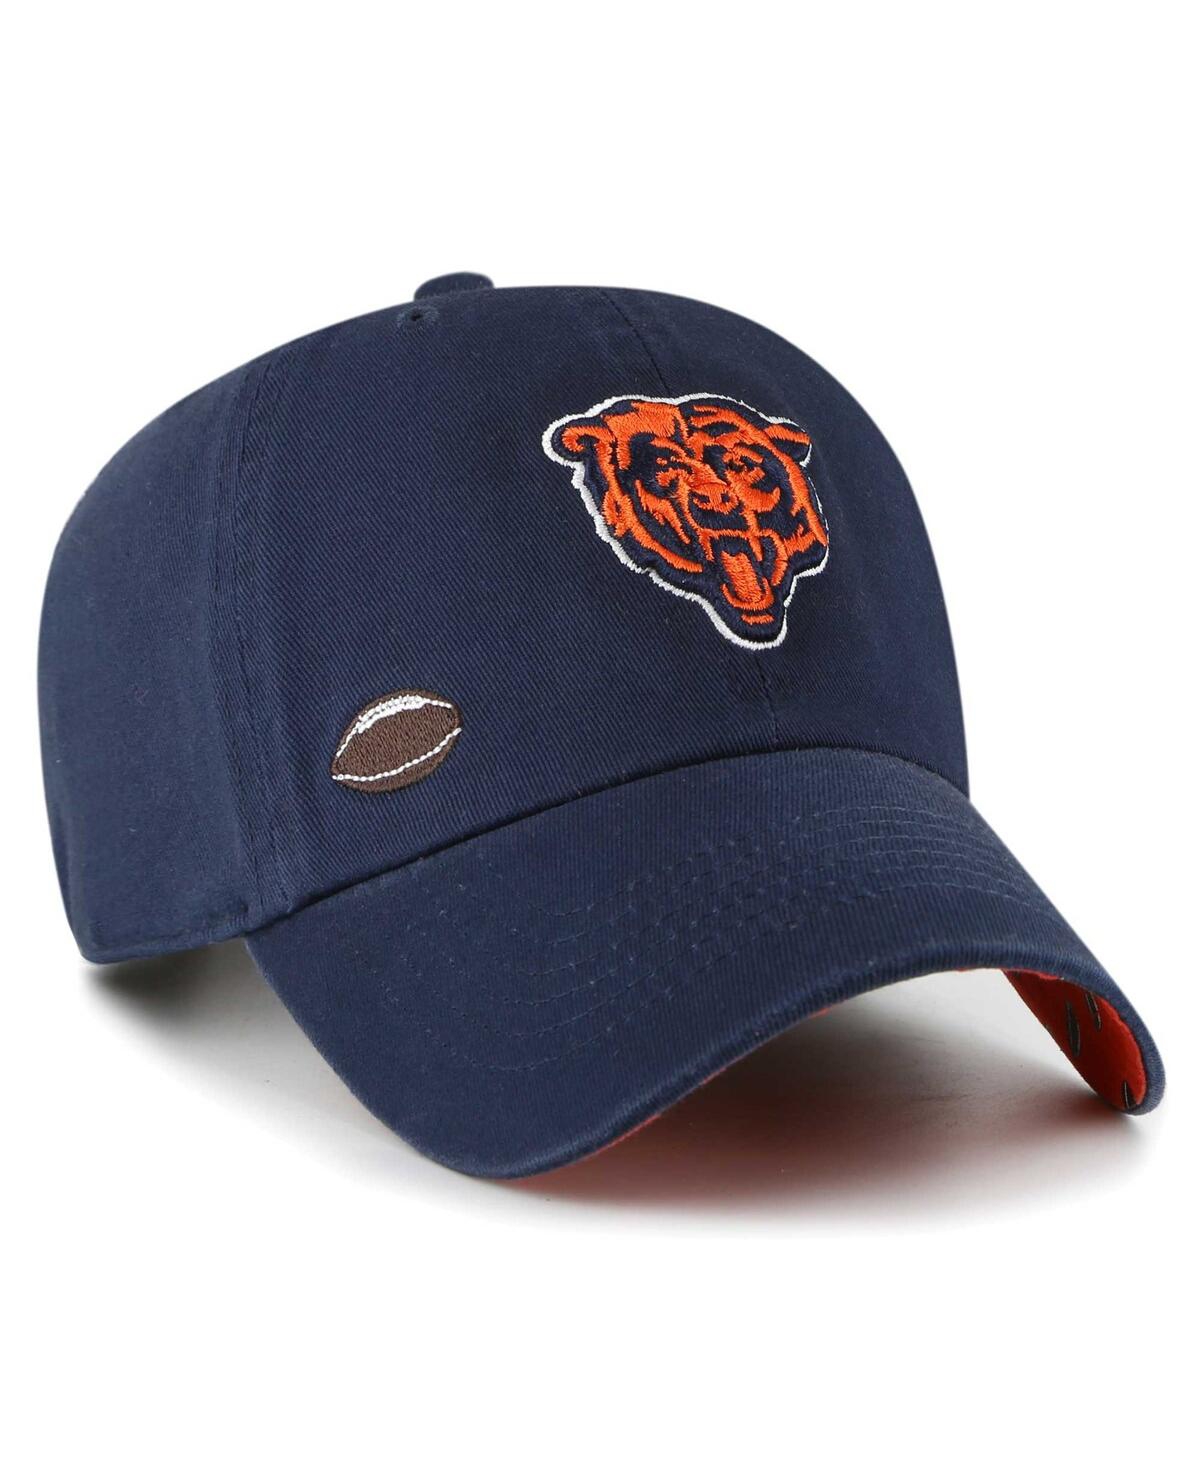 47 Women's Navy Chicago Bears Confetti Icon Clean Up Adjustable Hat - Navy